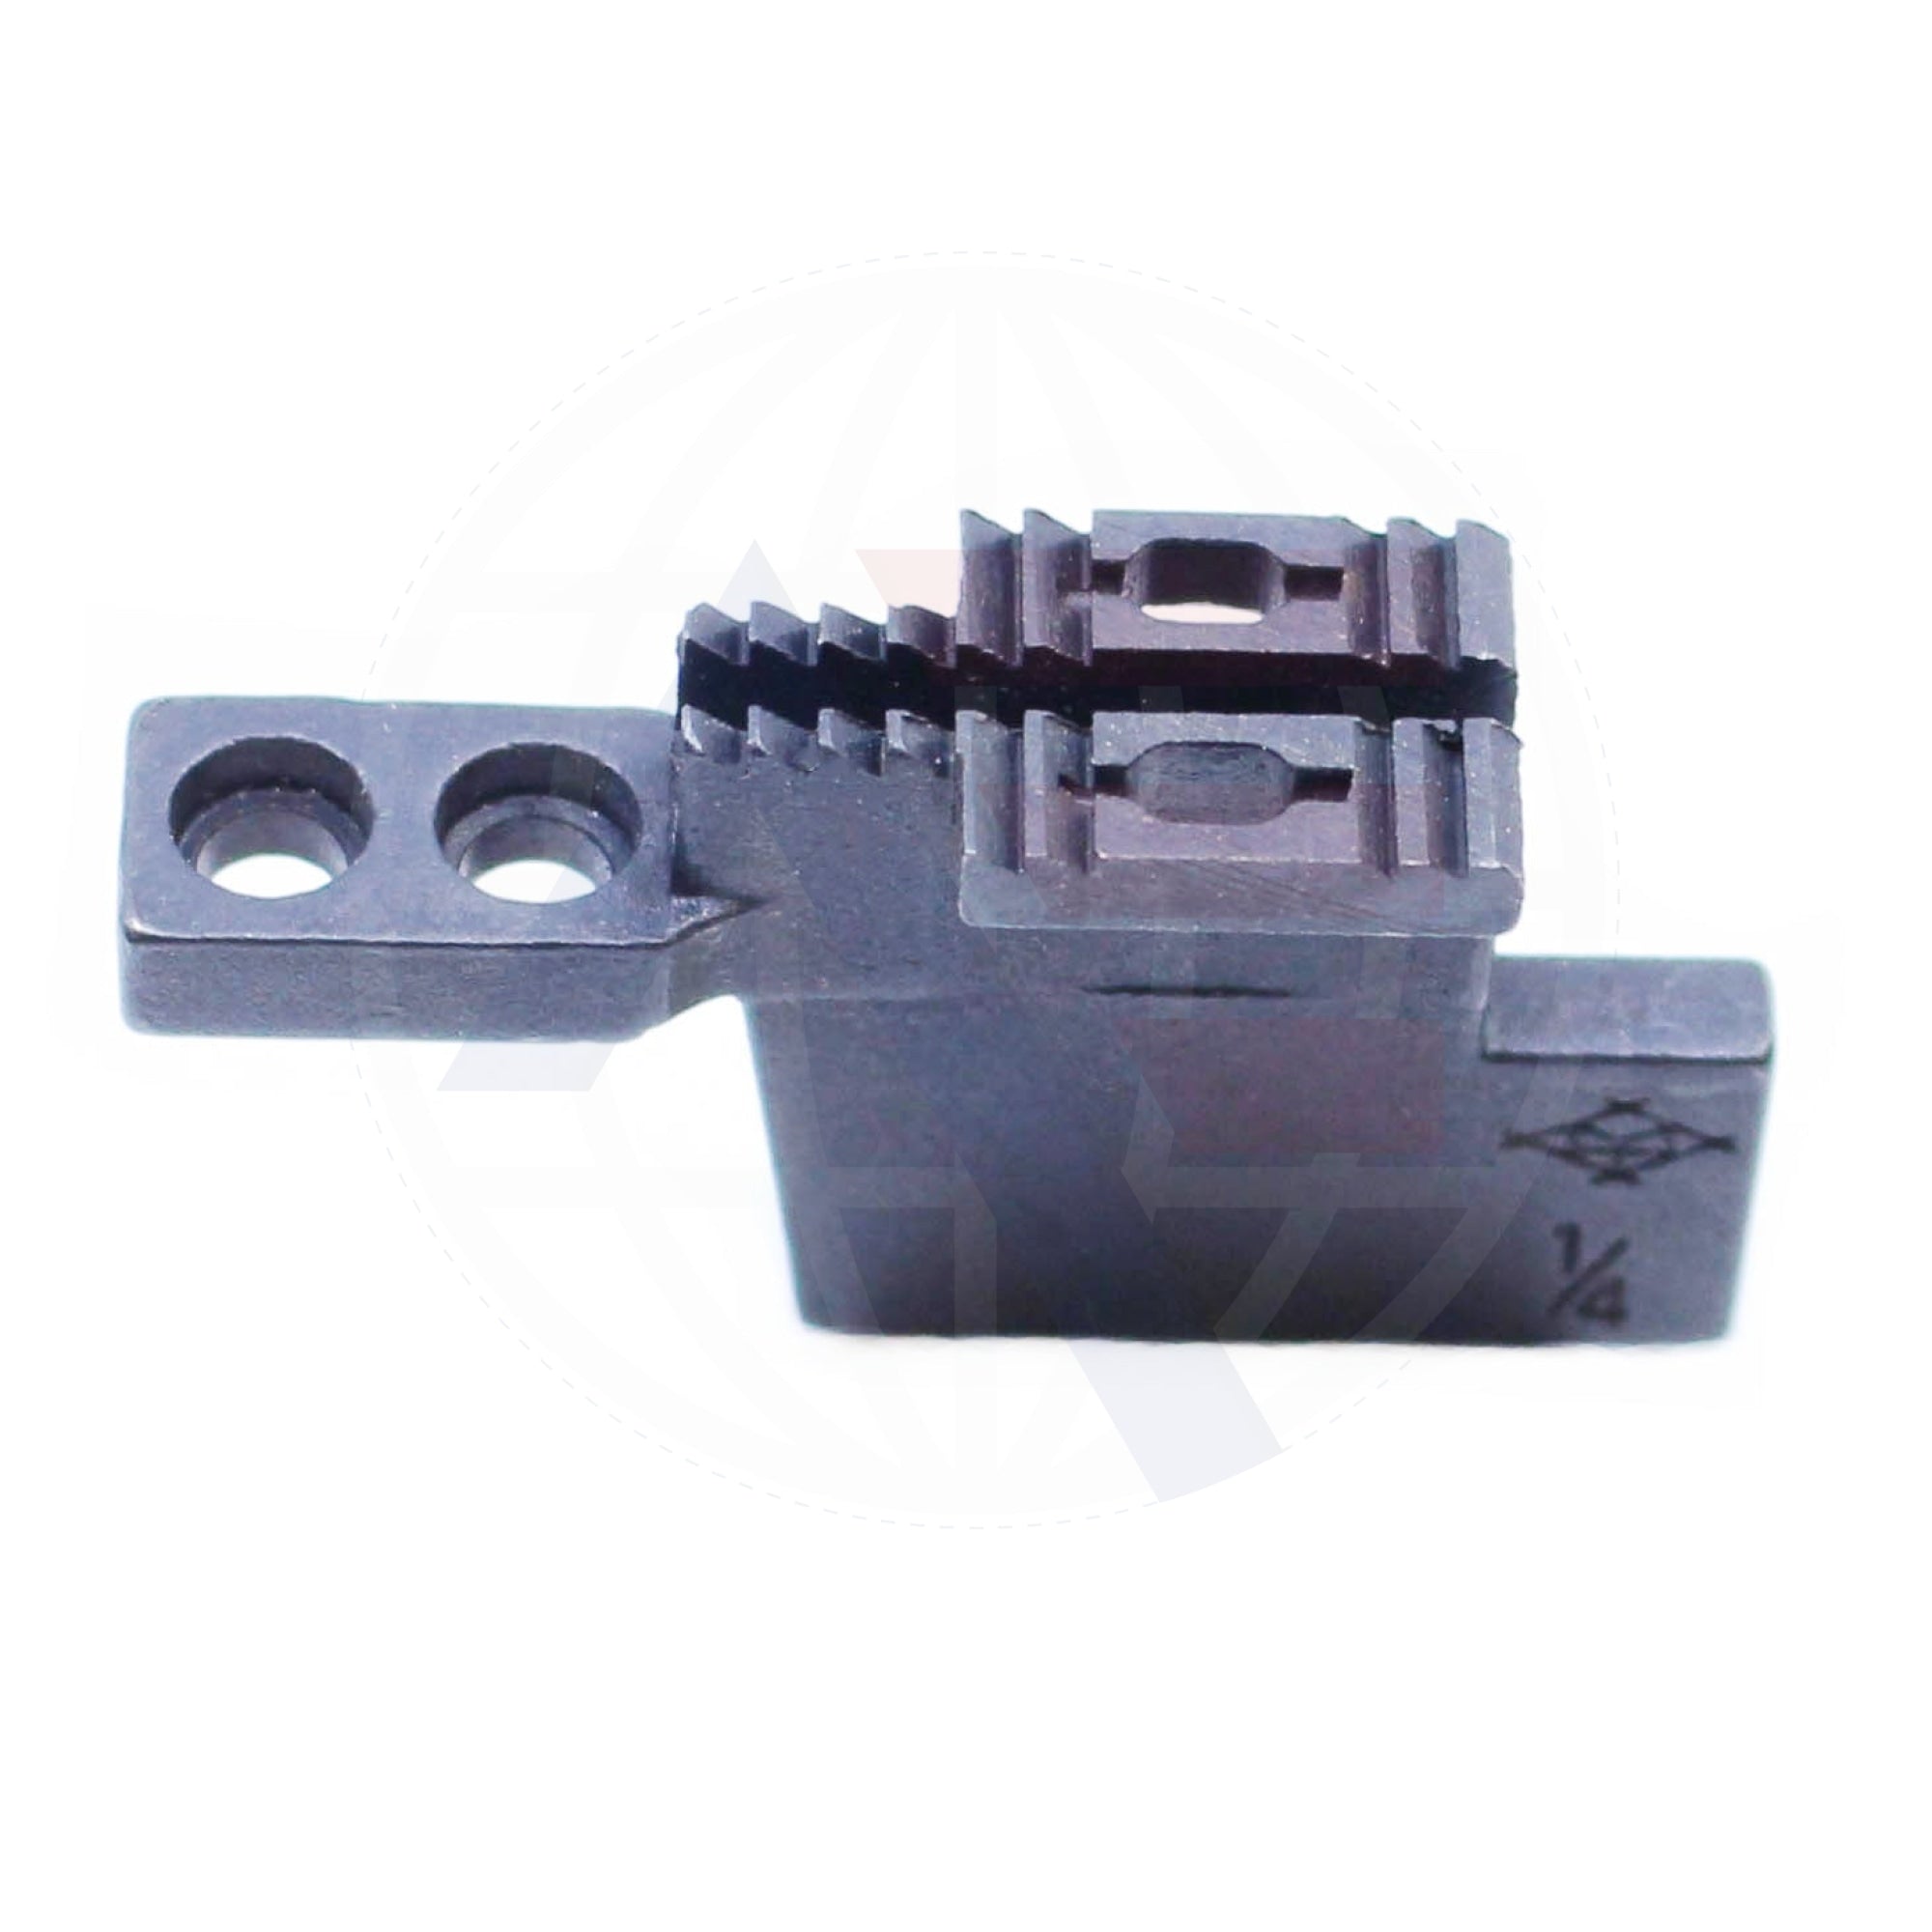 153882 Heavy Duty Feed Dog Sewing Machine Spare Parts